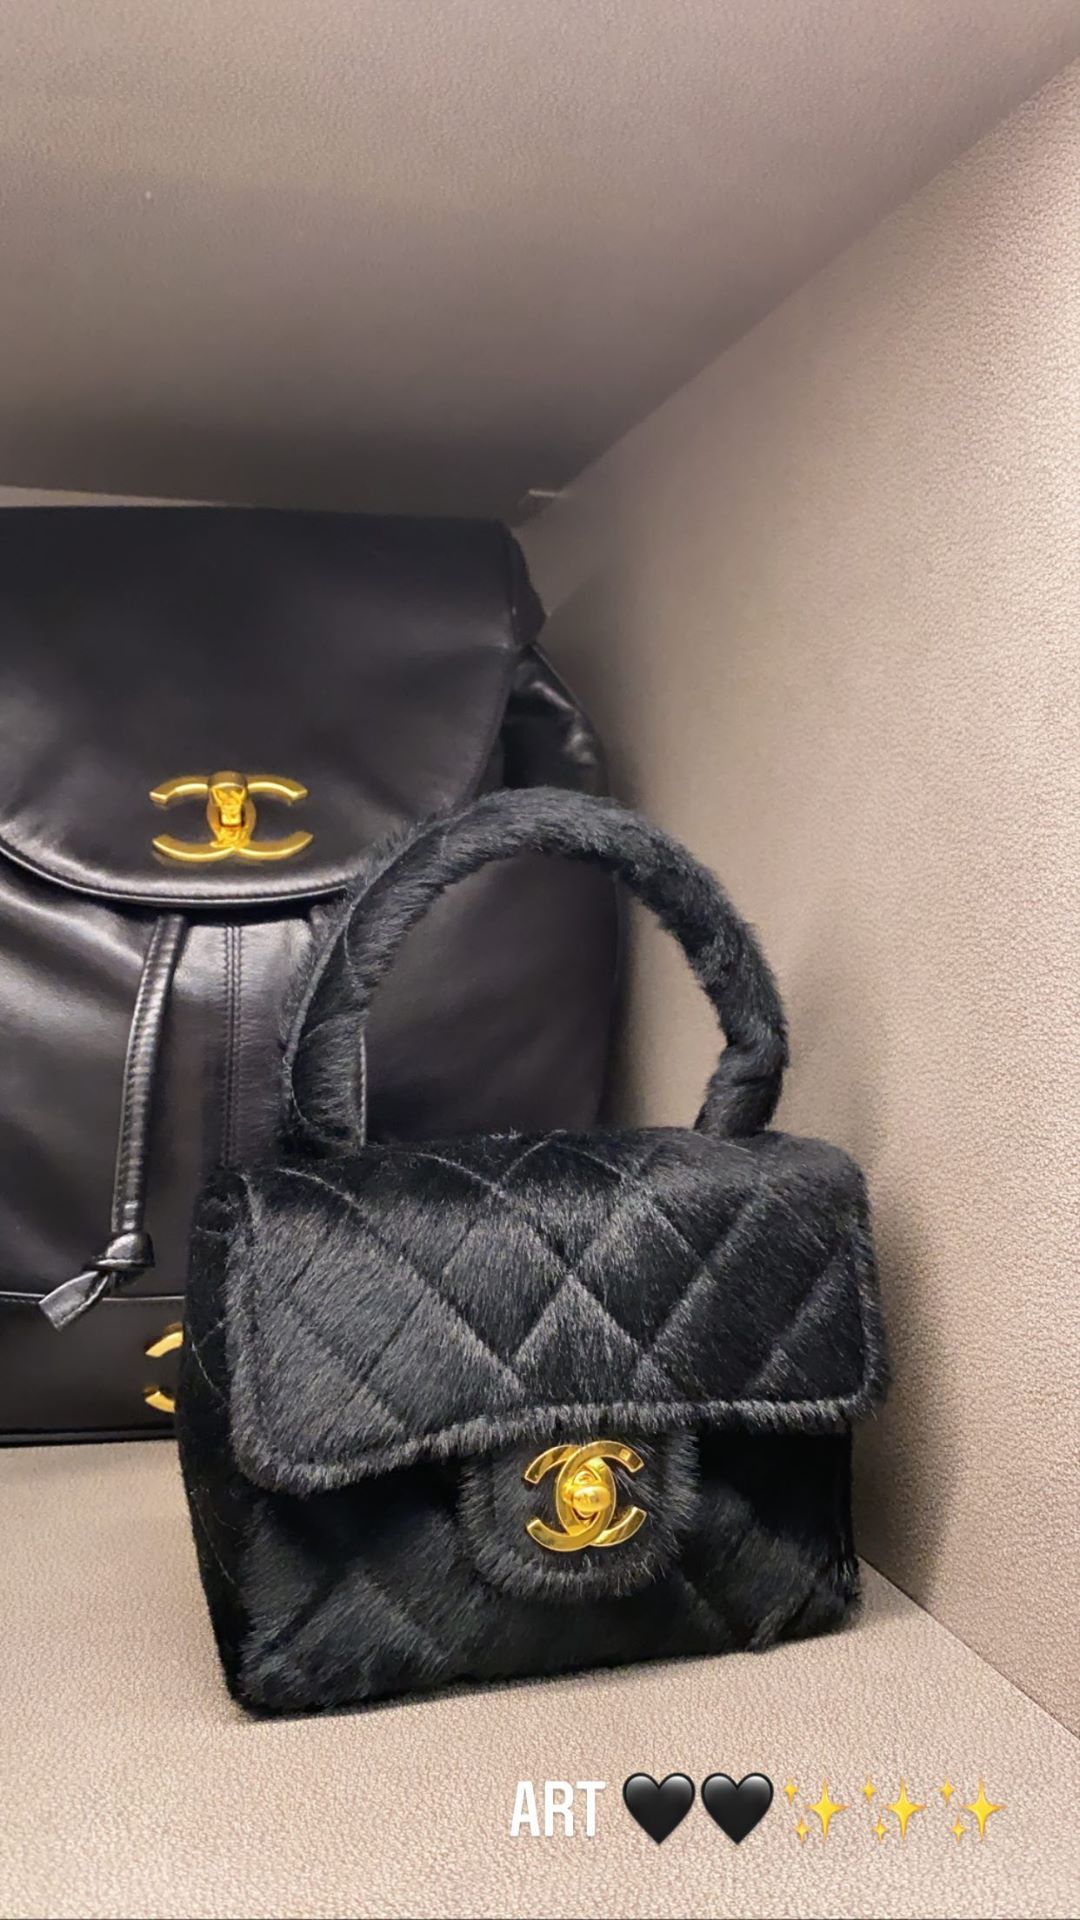 We Calculated How Much Kylie Jenner's Handbag Closet is WorthHelloGiggles